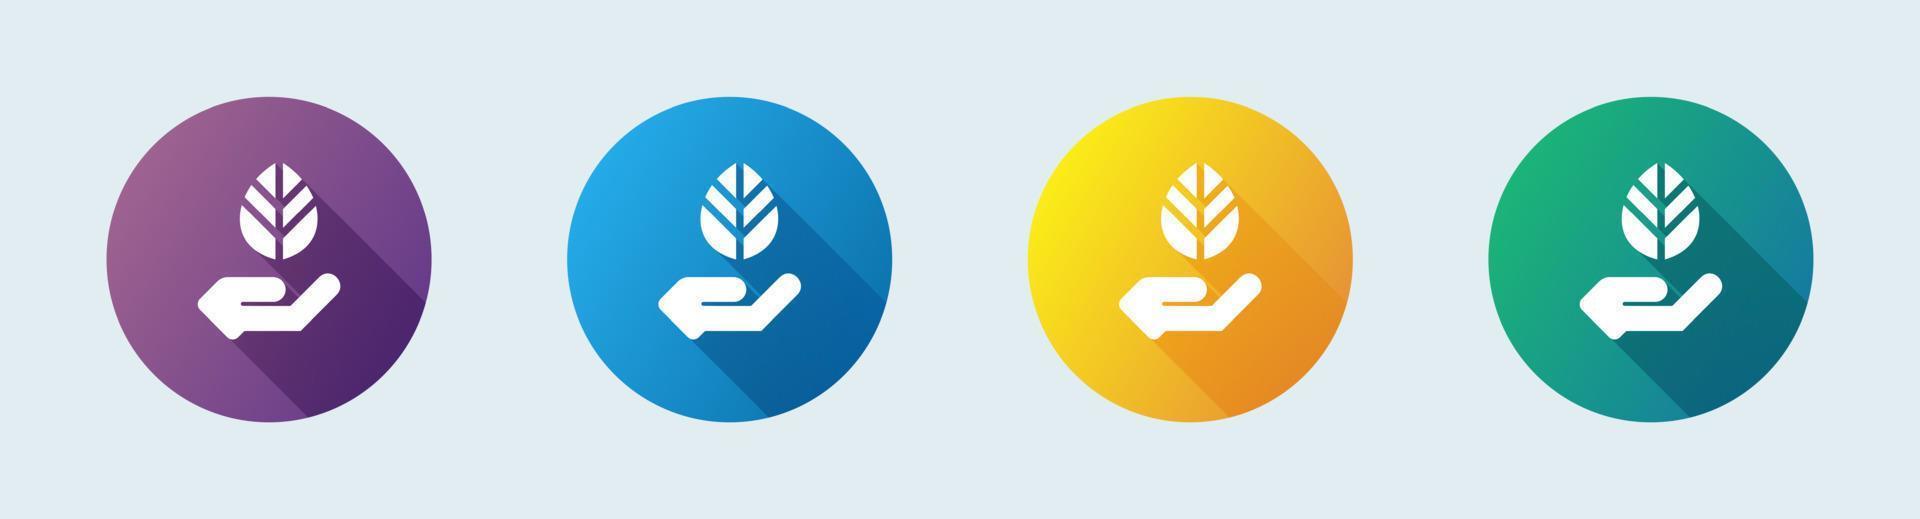 Eco solid icon in flat design style. Ecology signs vector illustration.